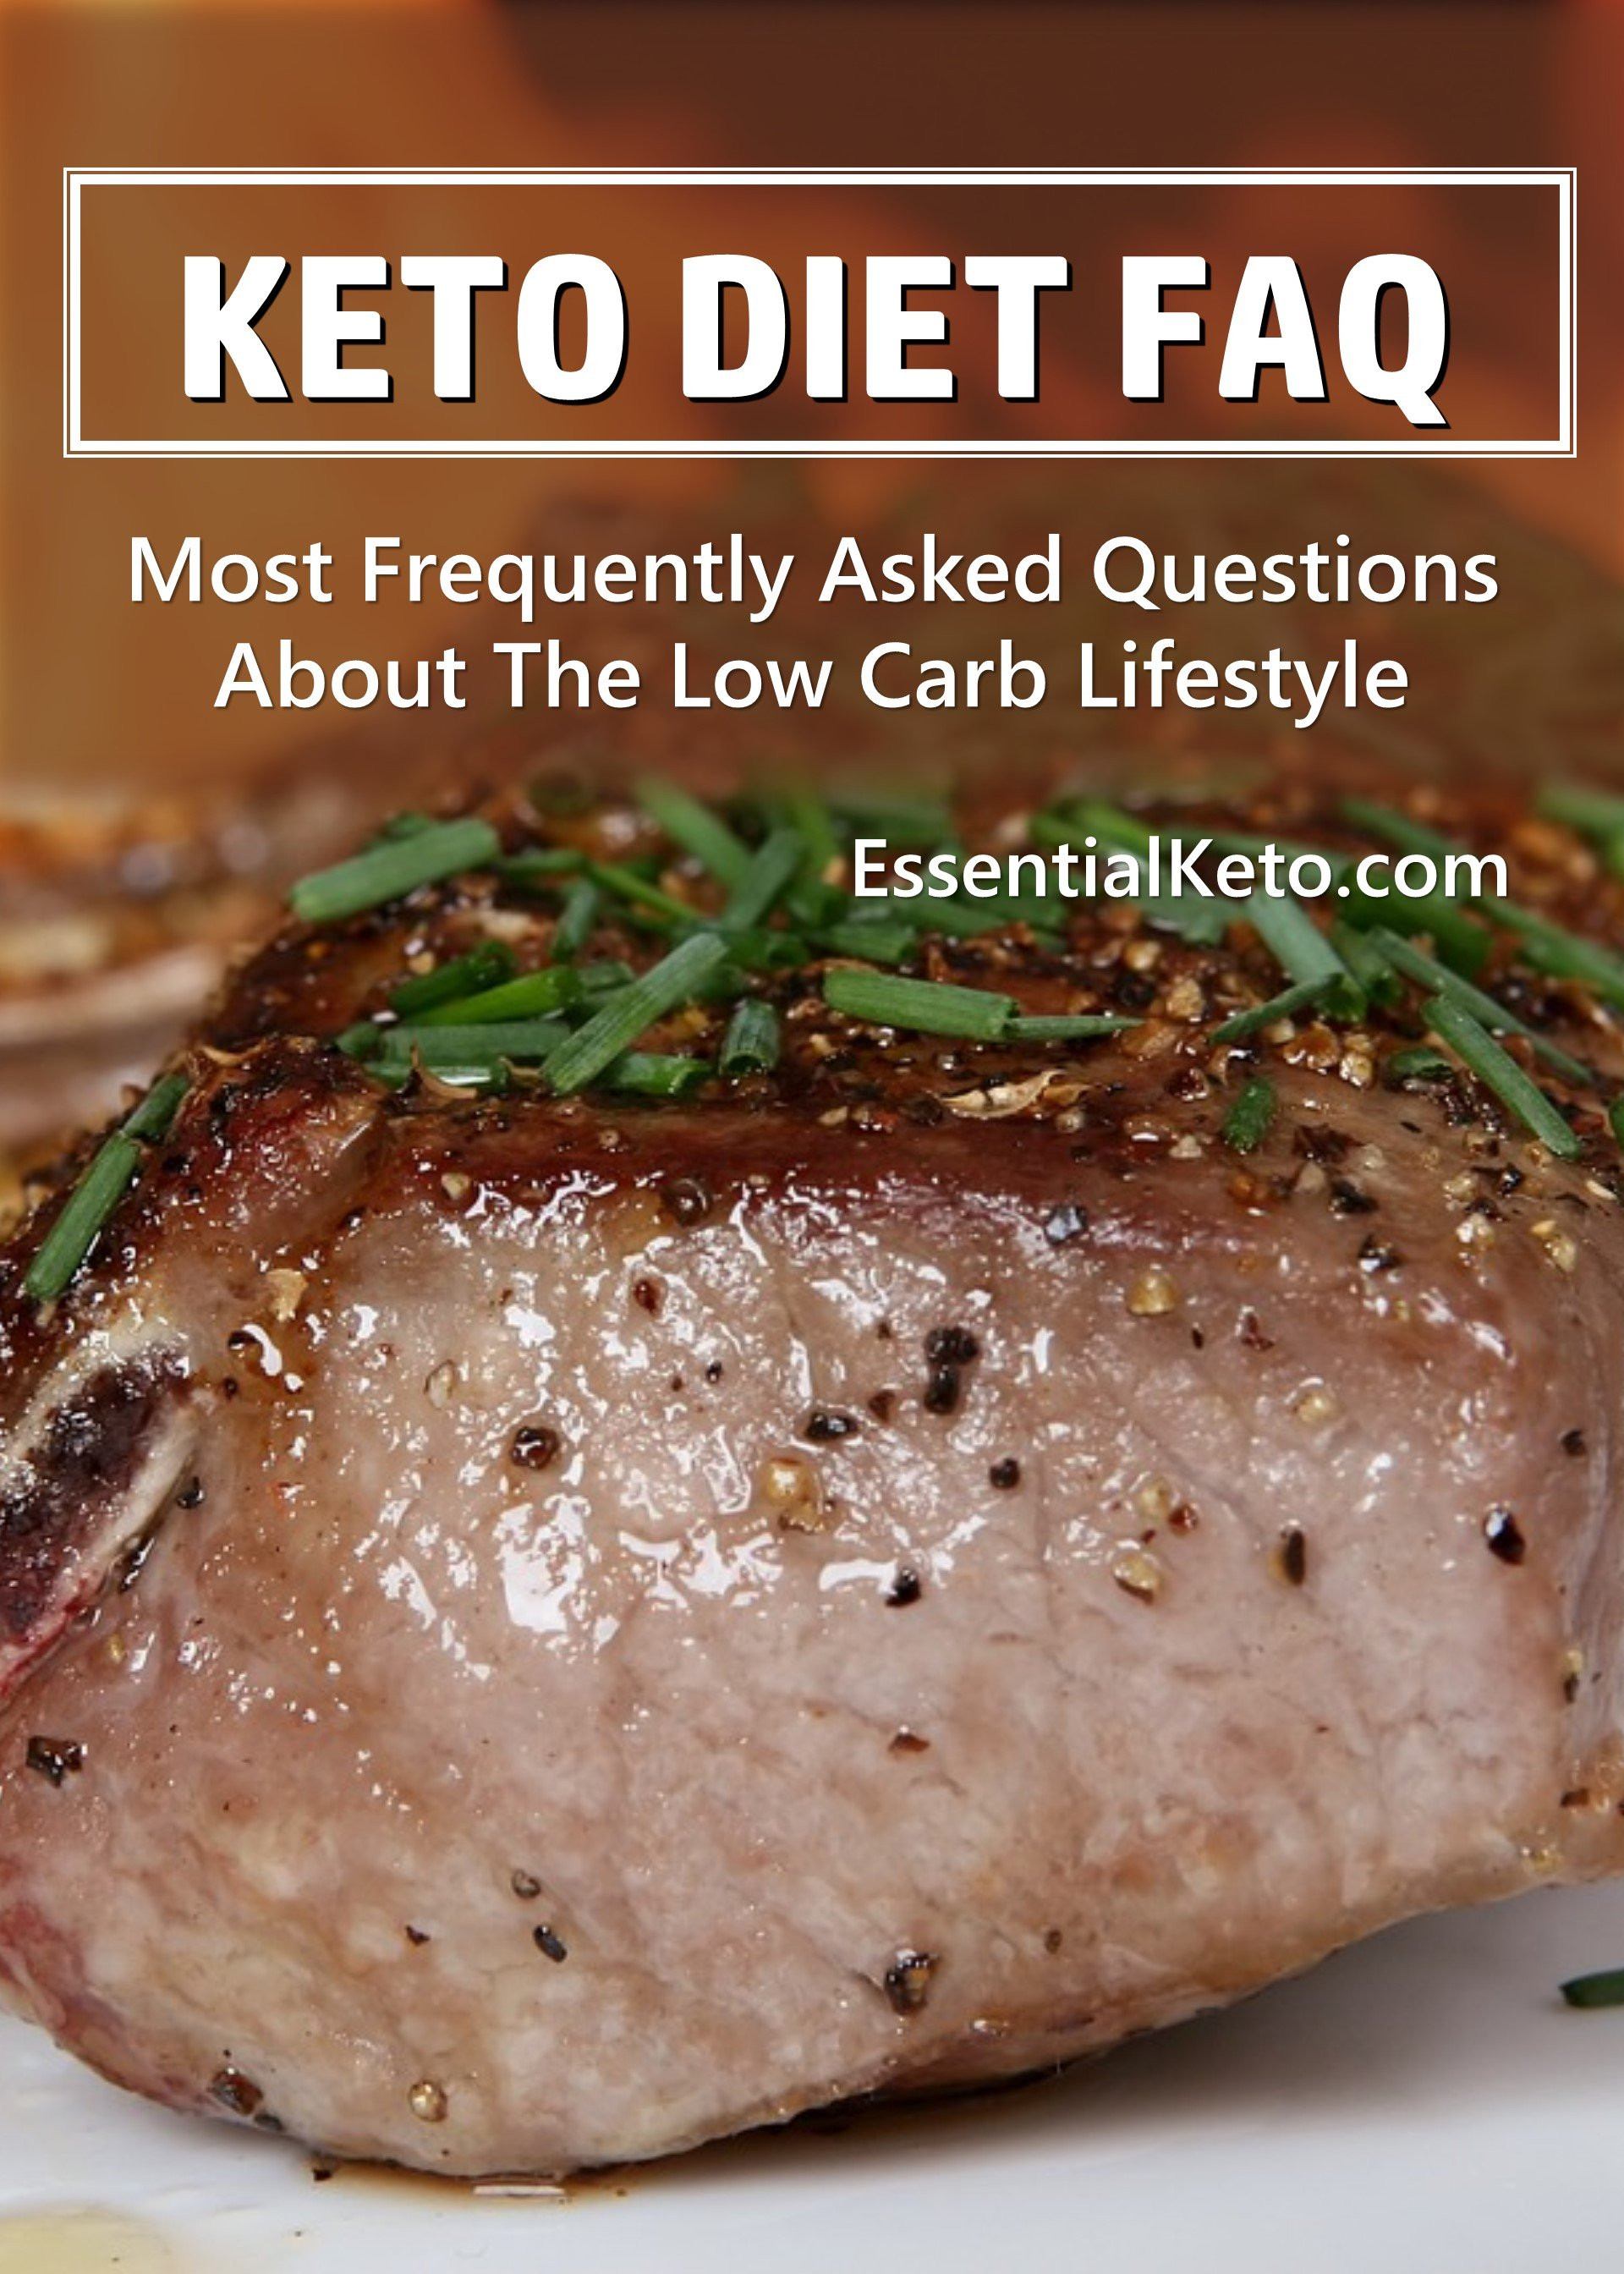 Keto Diet Faq
 Keto Frequently Asked Questions